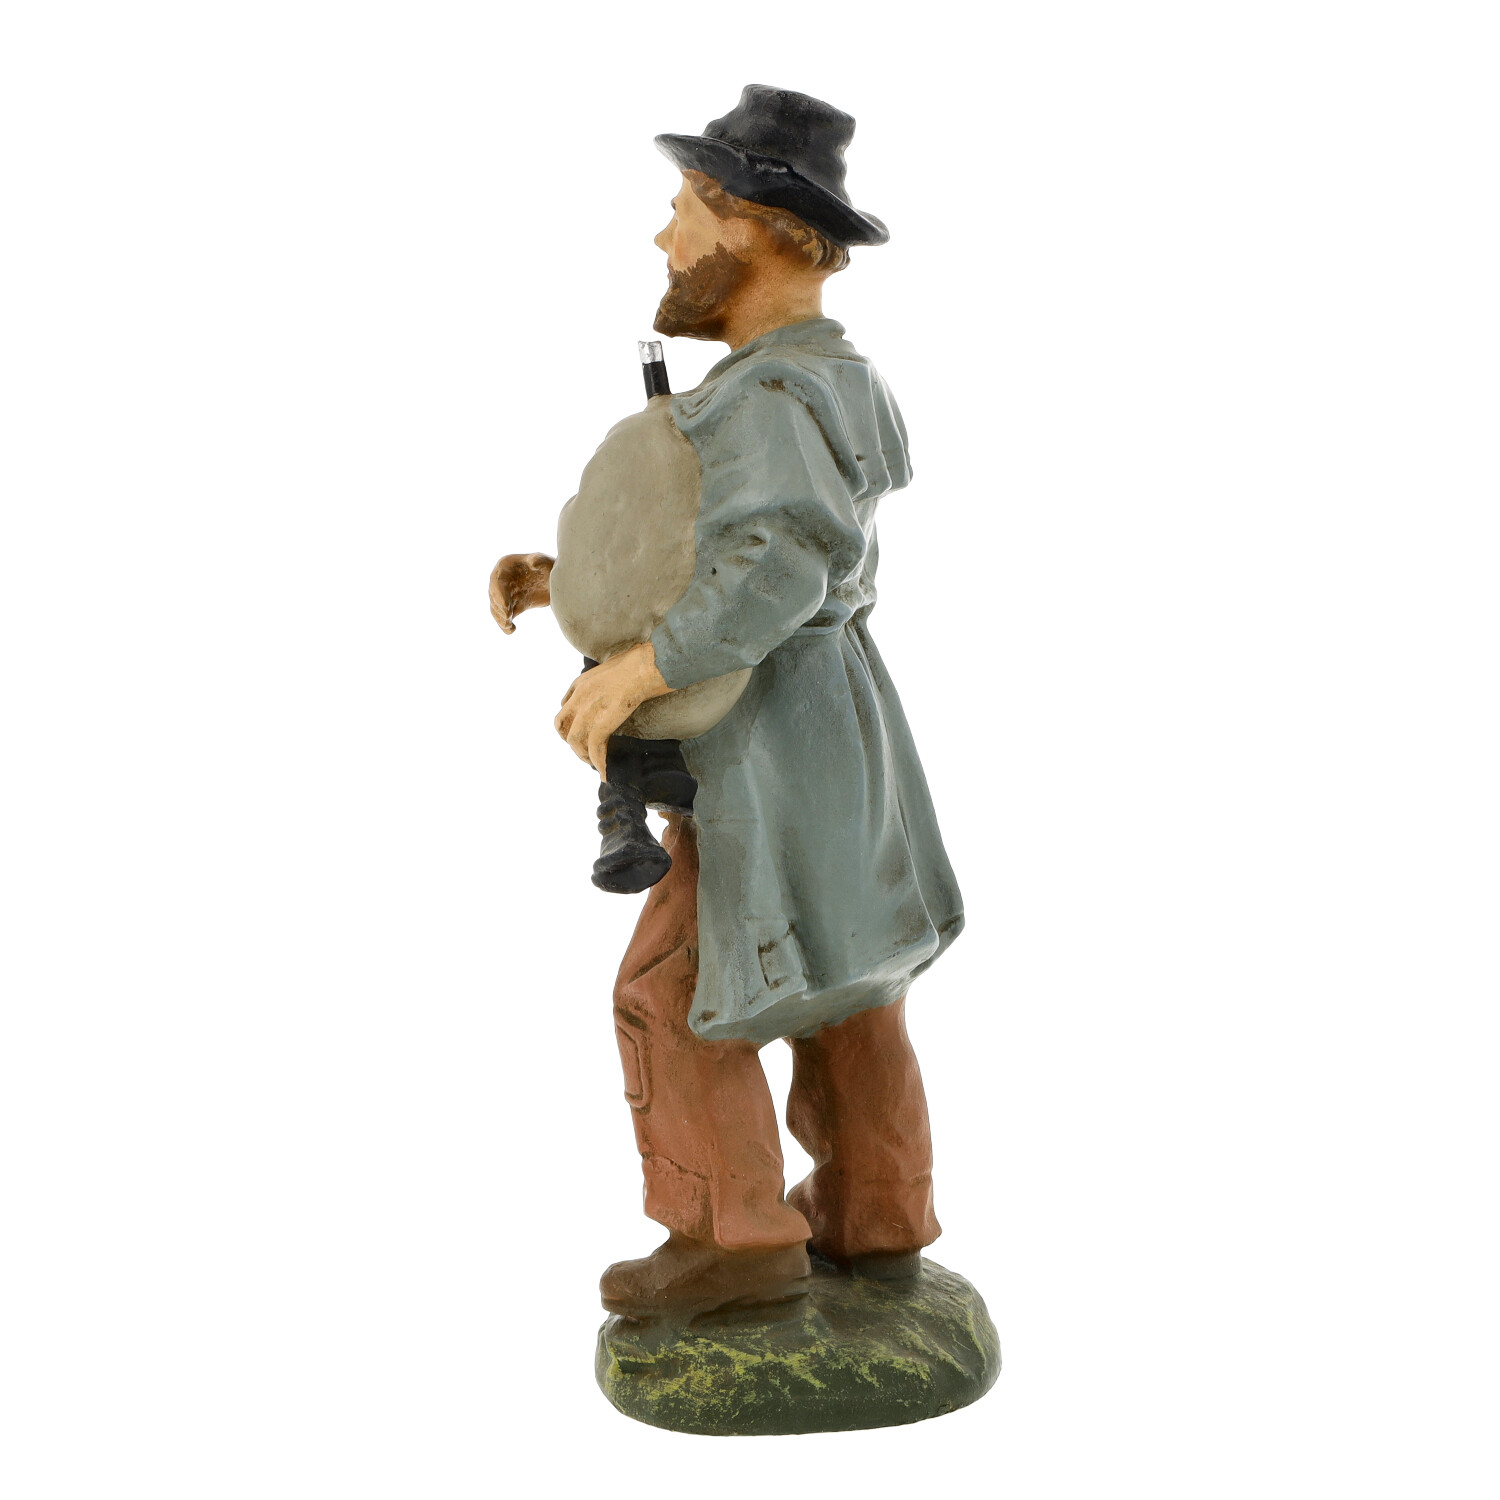 Old shepherd with bagpipe - Marolin - made in Germany